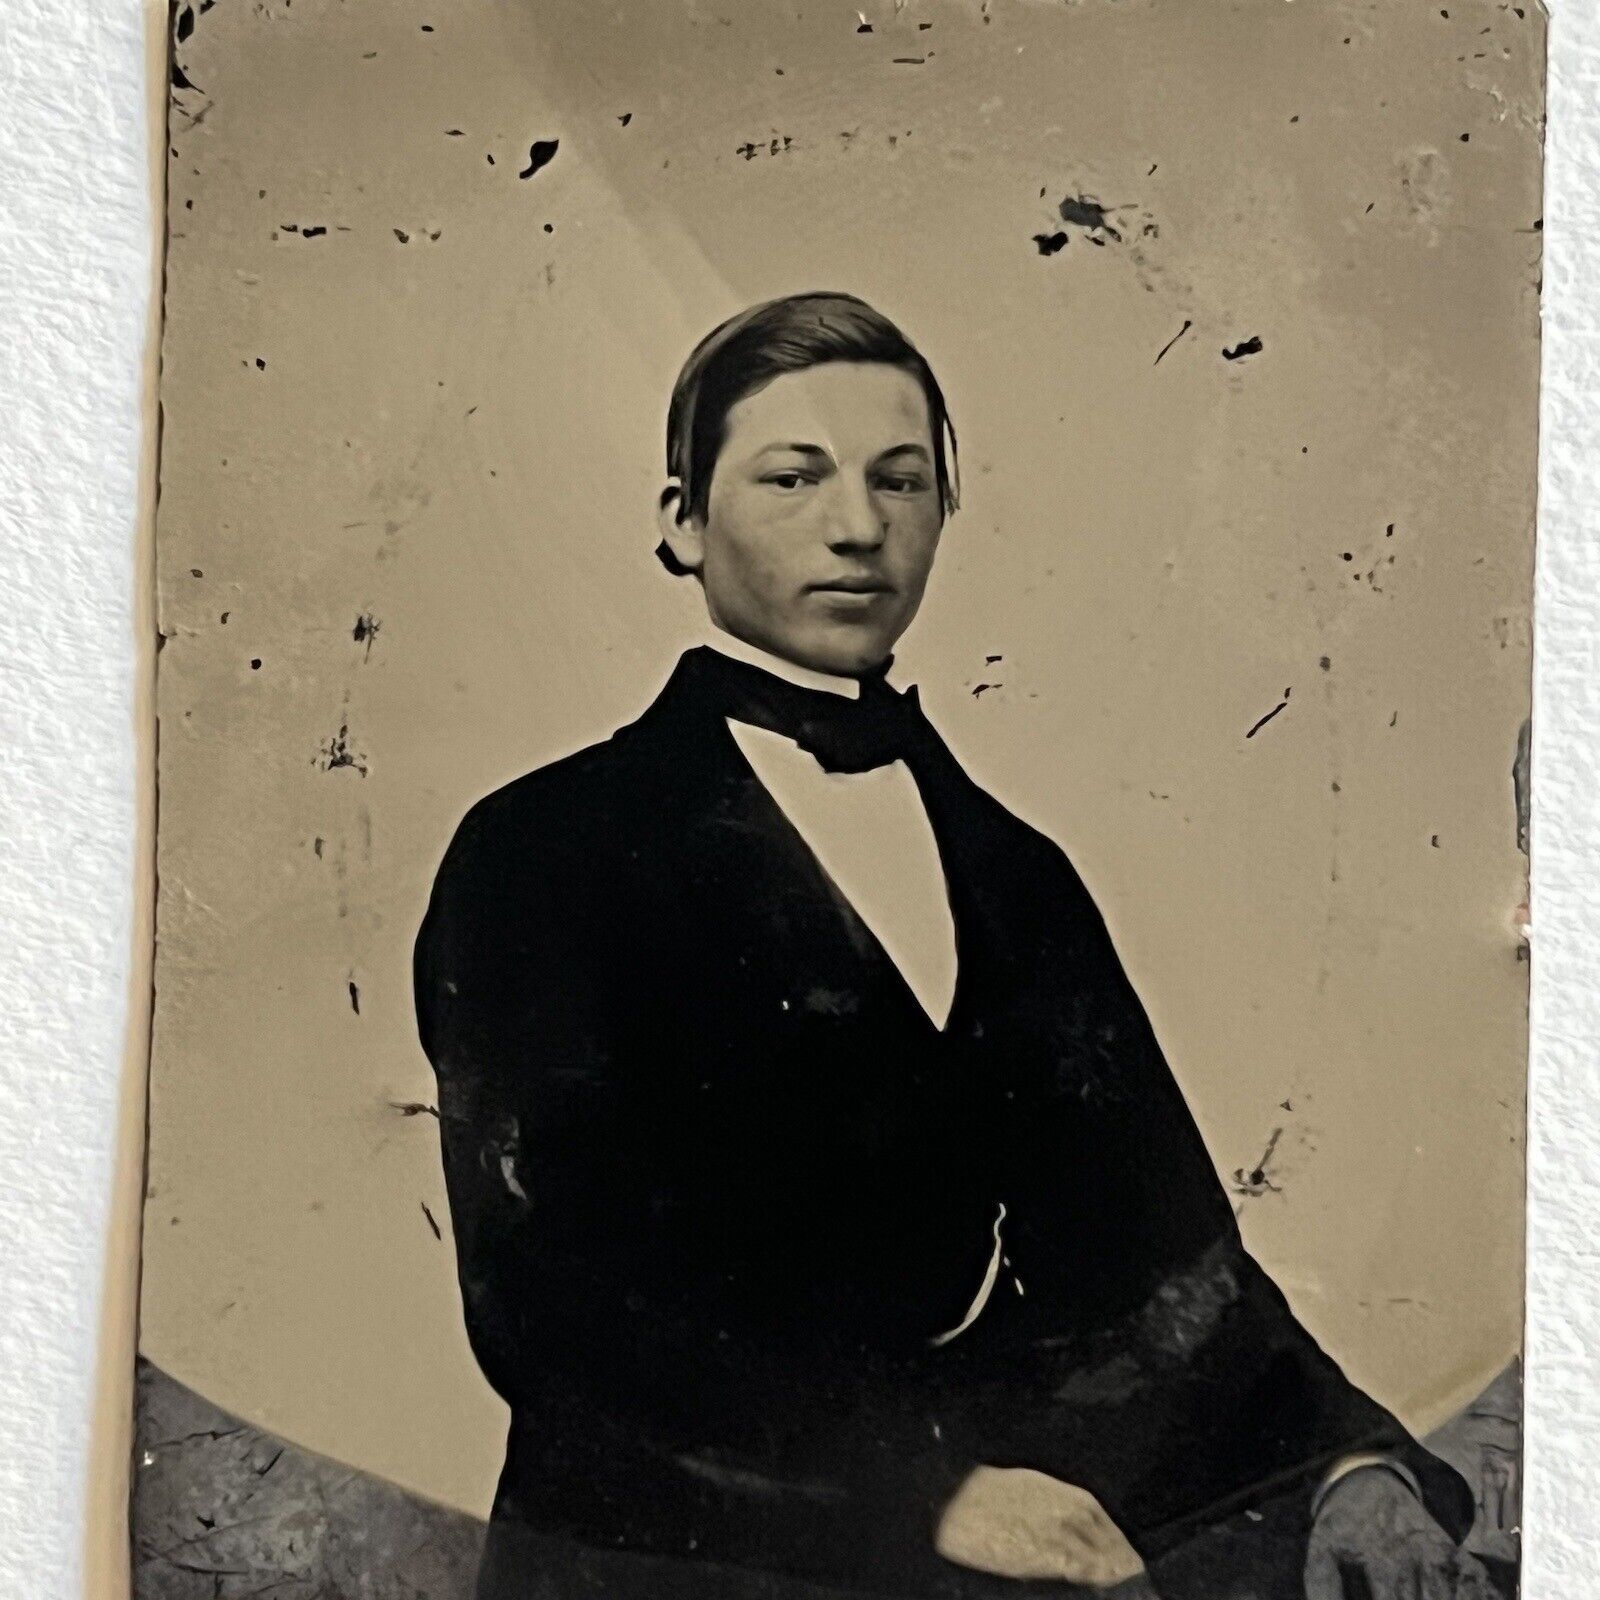 Antique Tintype Photograph Very Handsome Young Dapper Man Suit & Tie